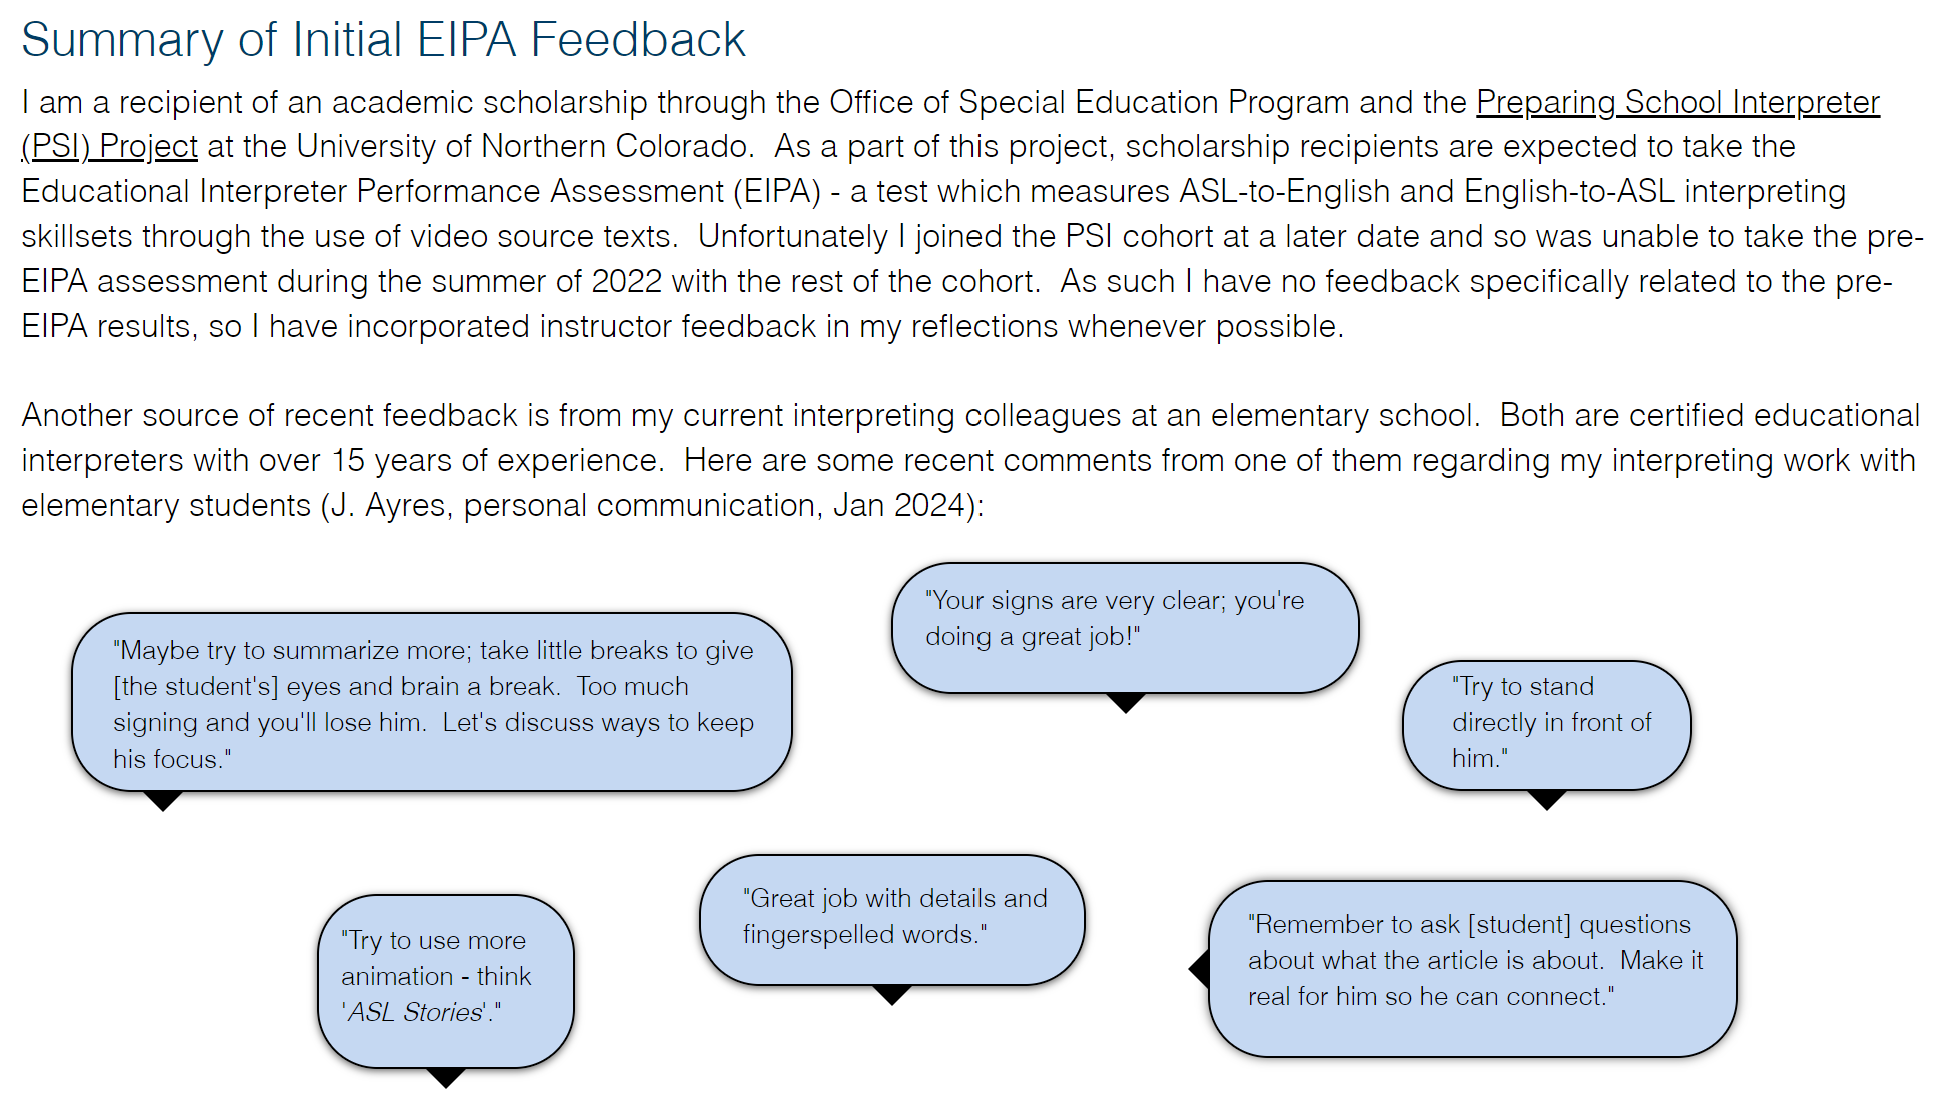 Screenshot of Scholar Si Website for the alternative Summary of Initial EIPA Feedback section